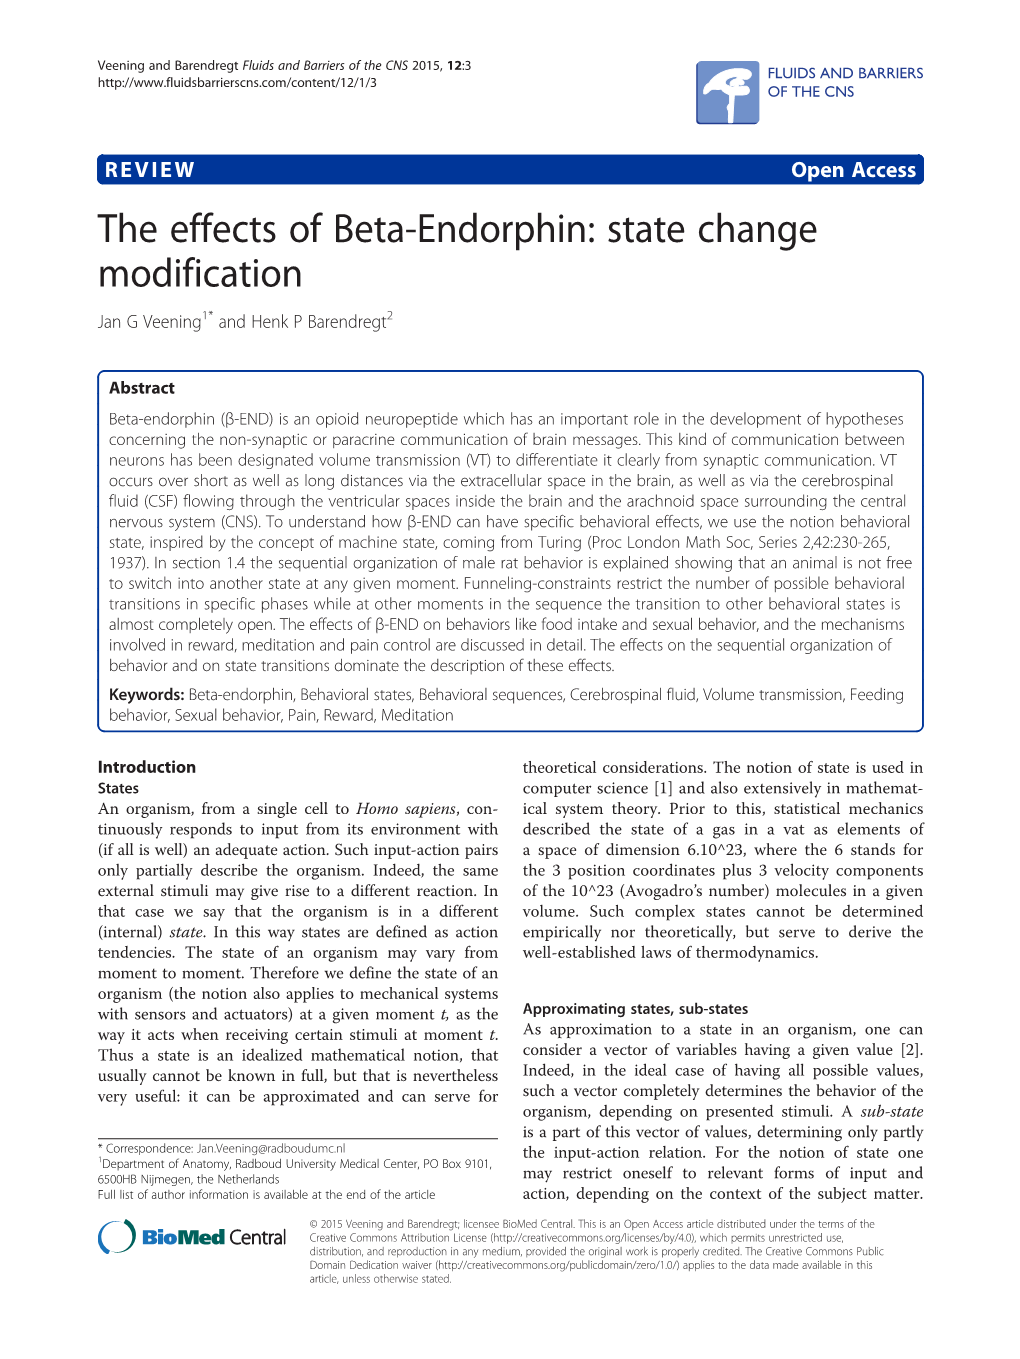 The Effects of Beta-Endorphin: State Change Modification Jan G Veening1* and Henk P Barendregt2